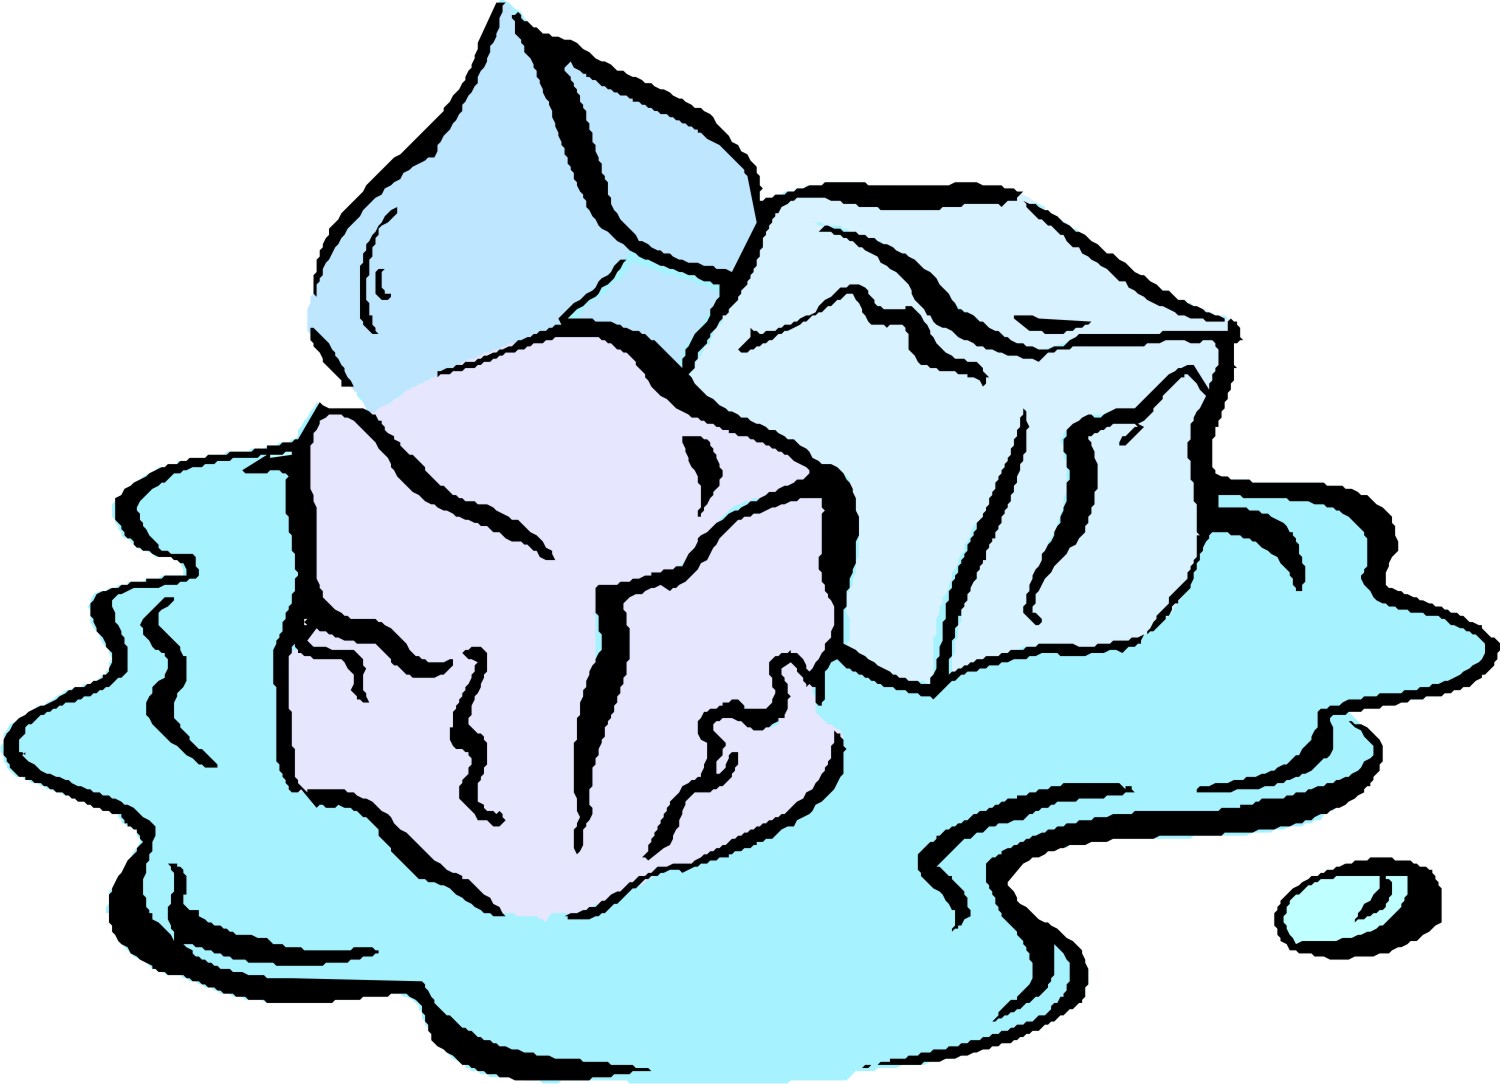 Melting ice cube clipart